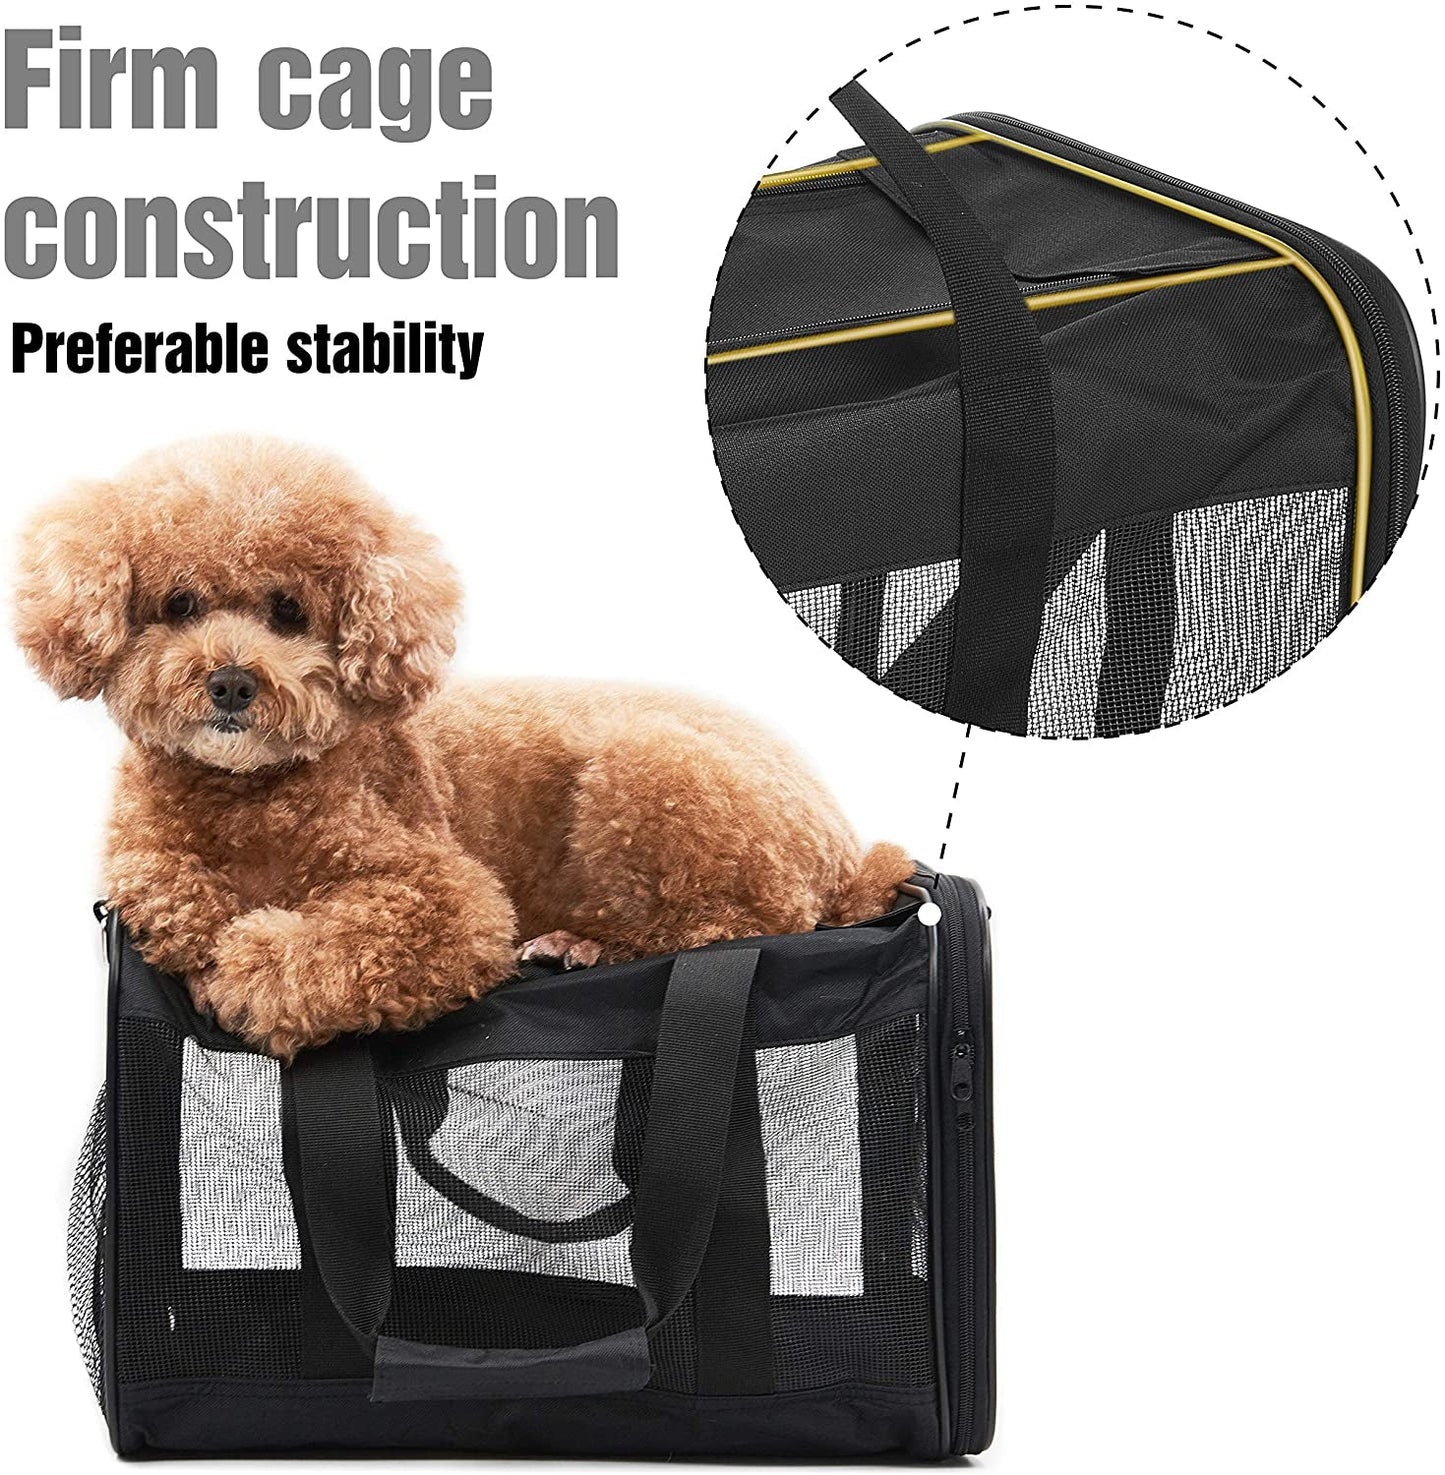 Scratchme Pet Travel Carrier Soft Sided Portable Bag for Cats, Small Dogs, Kittens or Puppies, Collapsible, Durable, Airline Approved, Travel Friendly, Carry Your Pet with You Safely and Comfortably - PETGS